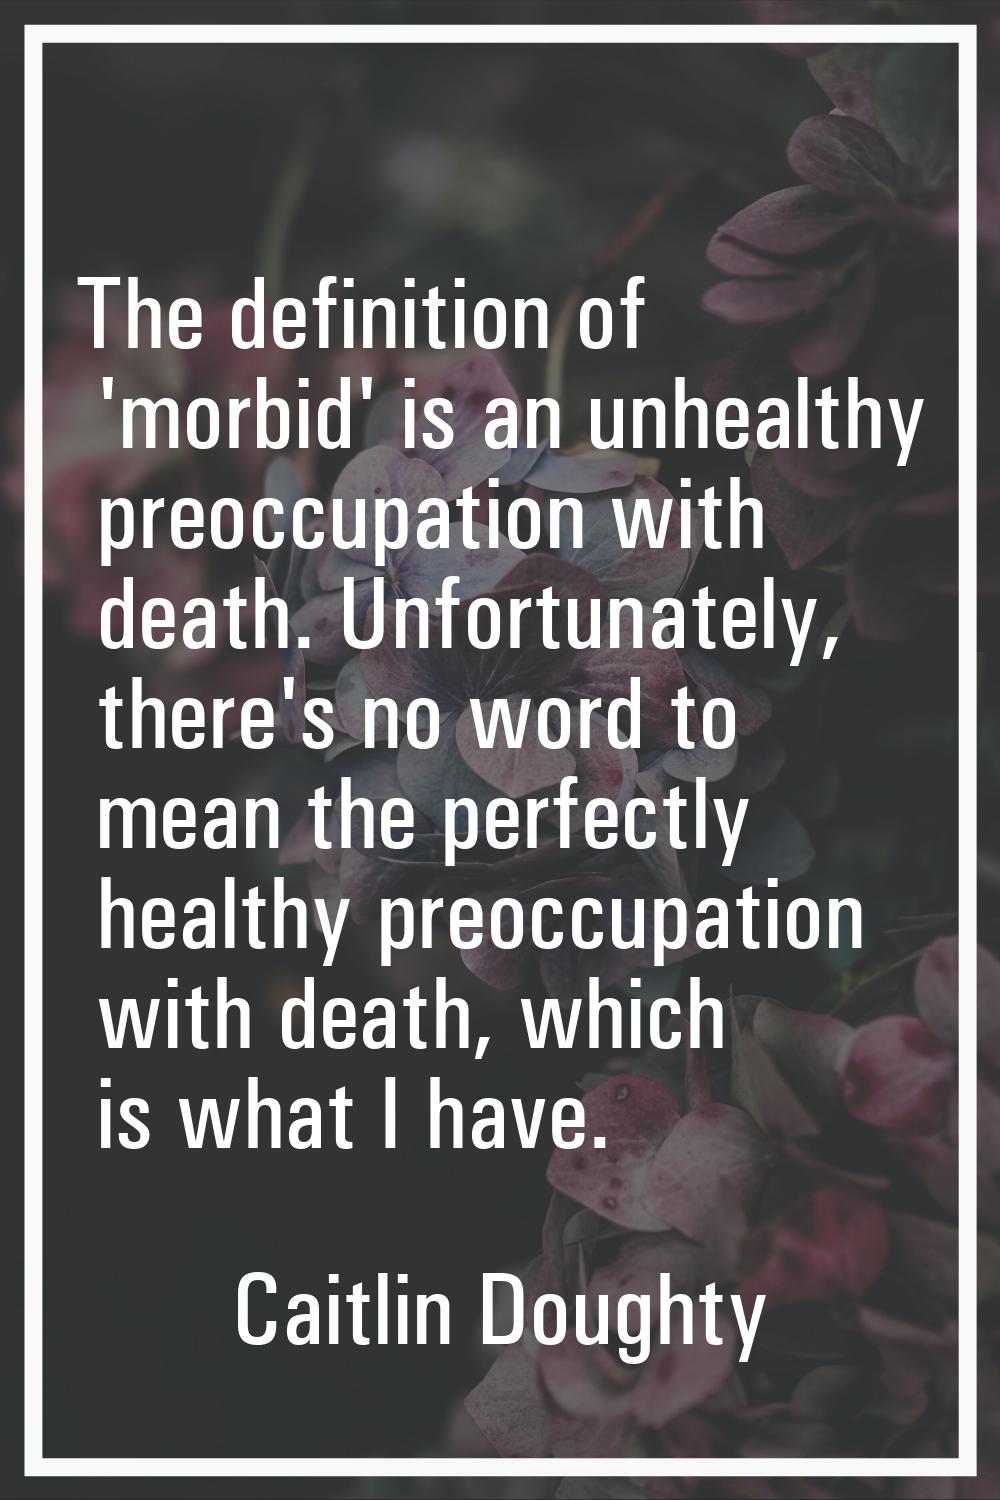 The definition of 'morbid' is an unhealthy preoccupation with death. Unfortunately, there's no word